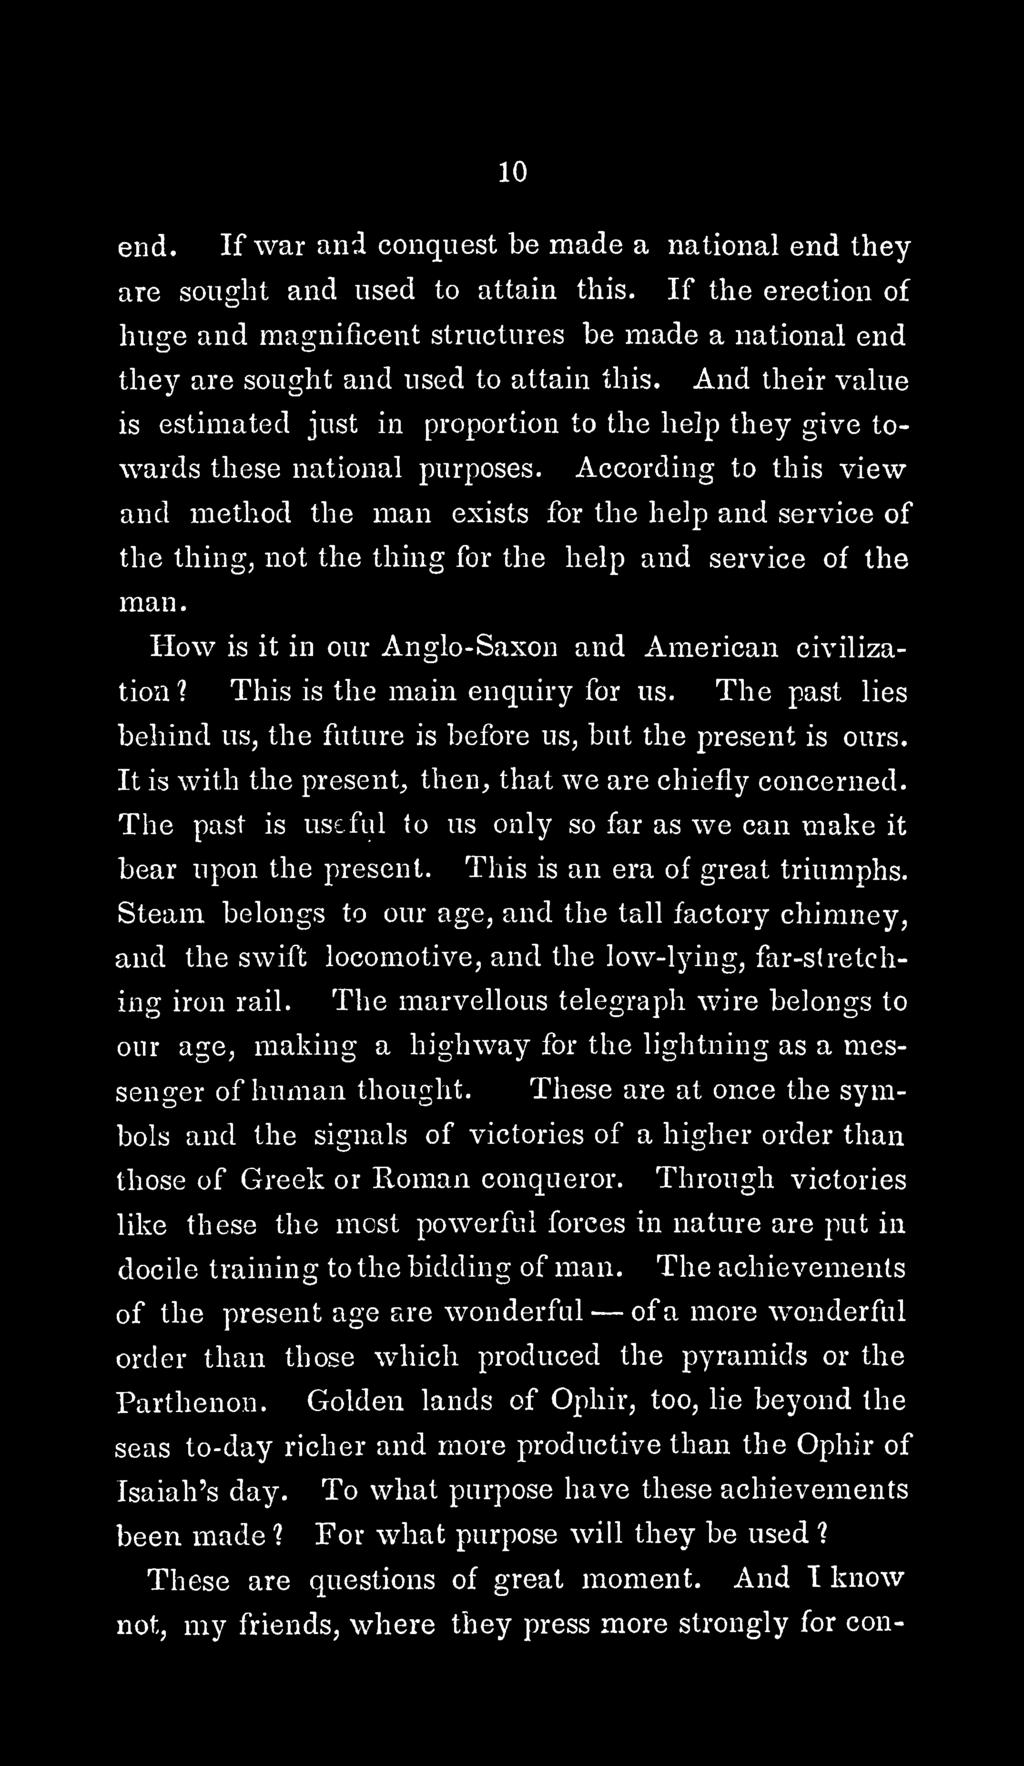 According to this view and method the man exists for the help and service of the thing, not the thing for the help and service of the man. How is it in our Anglo-Saxon and American civilization?